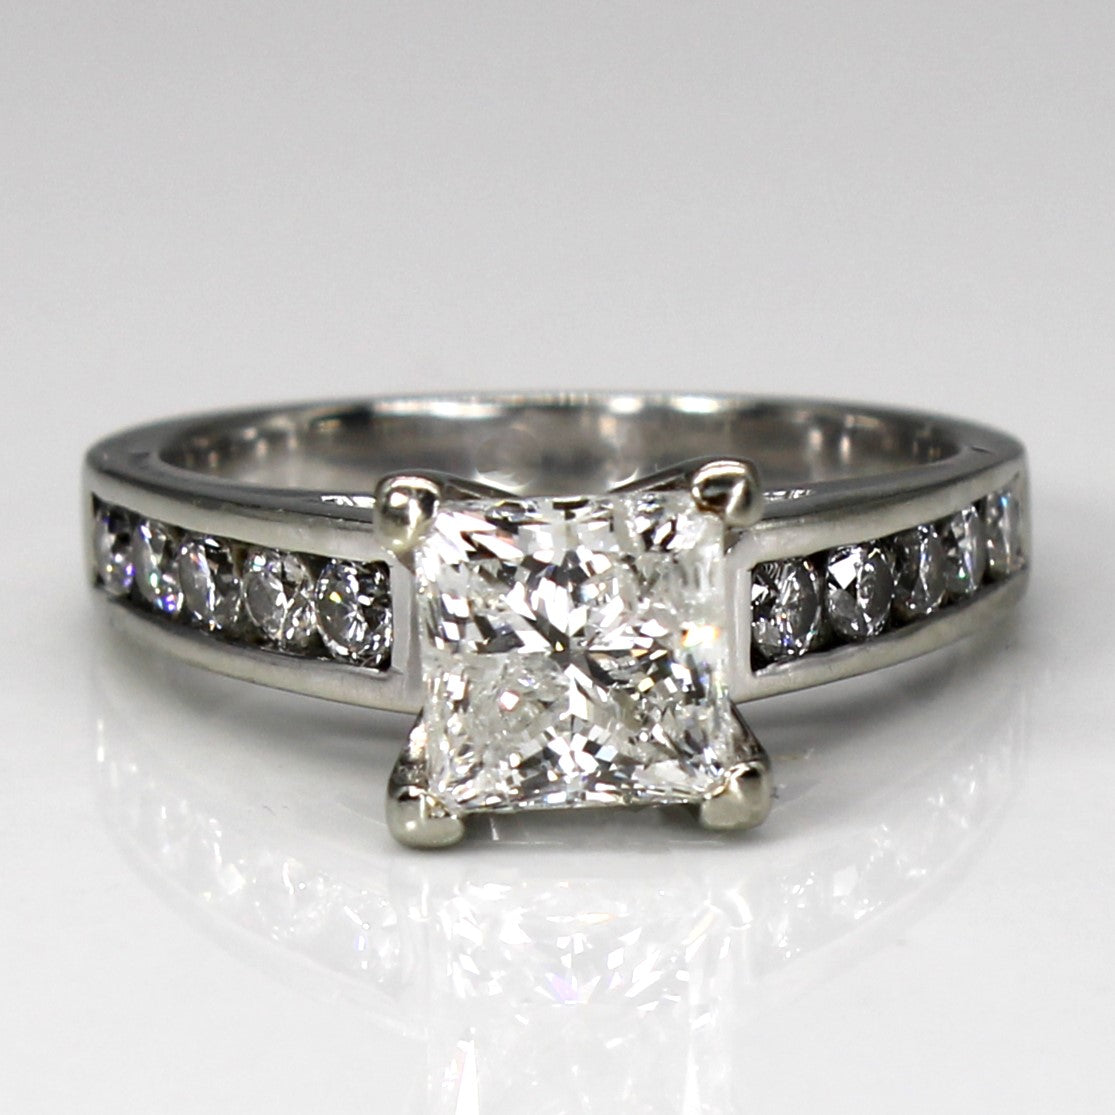 Princess Diamond with Accents Engagement Ring | 2.01ctw I1 G/H | SZ 6